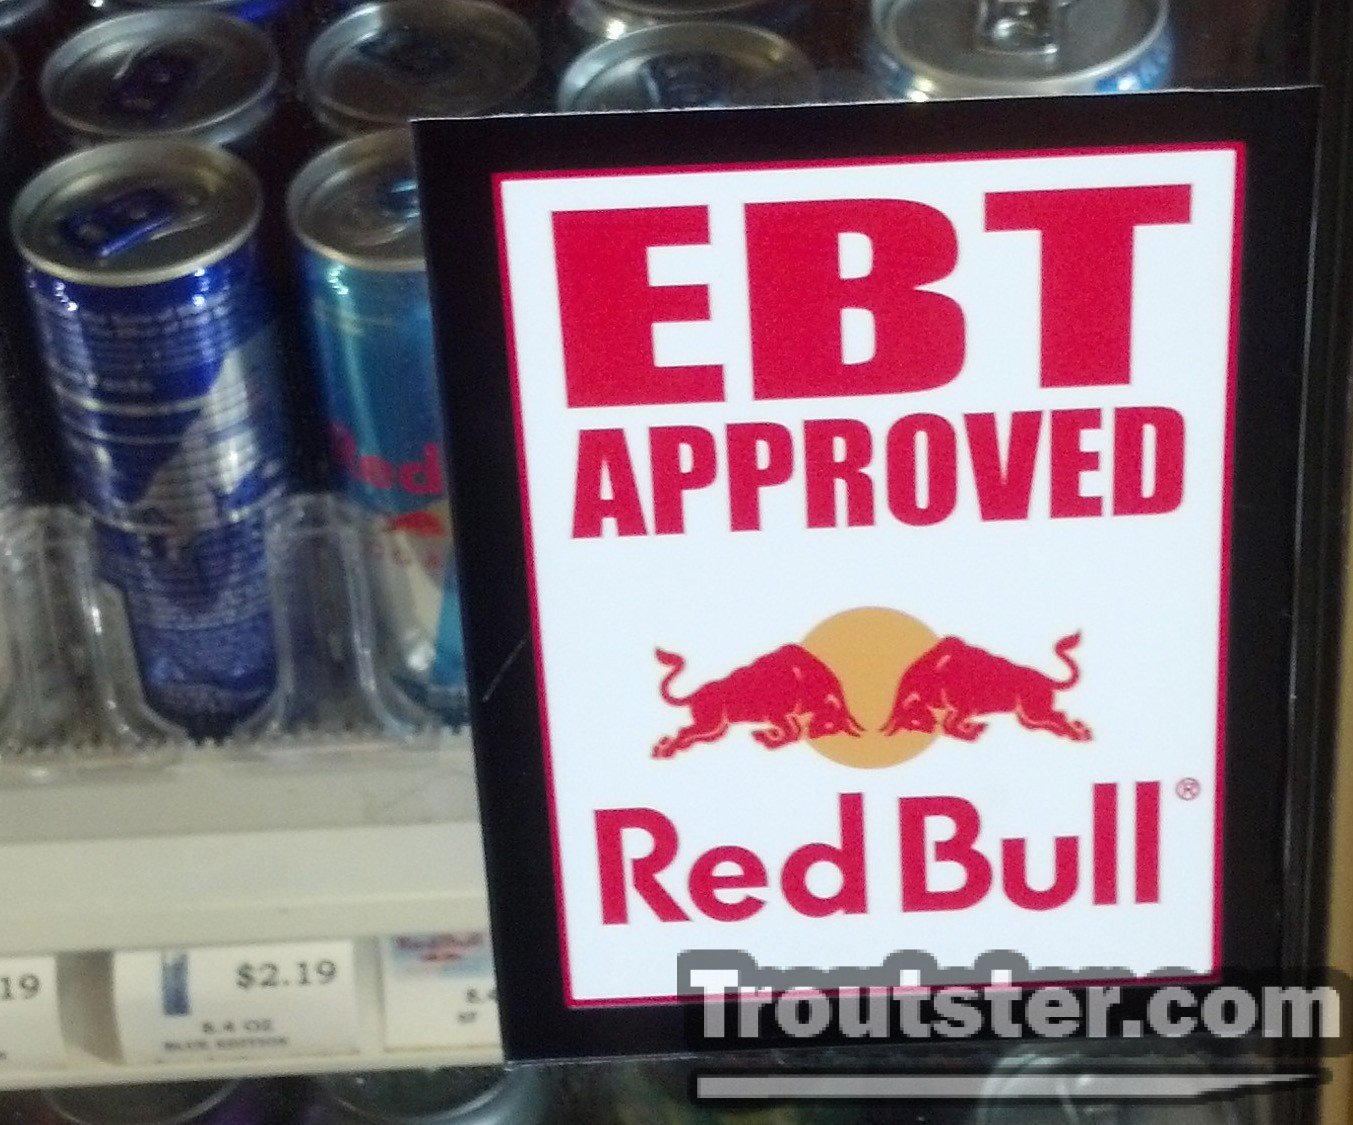 Why Can People Buy Red Bull On Food Stamps?